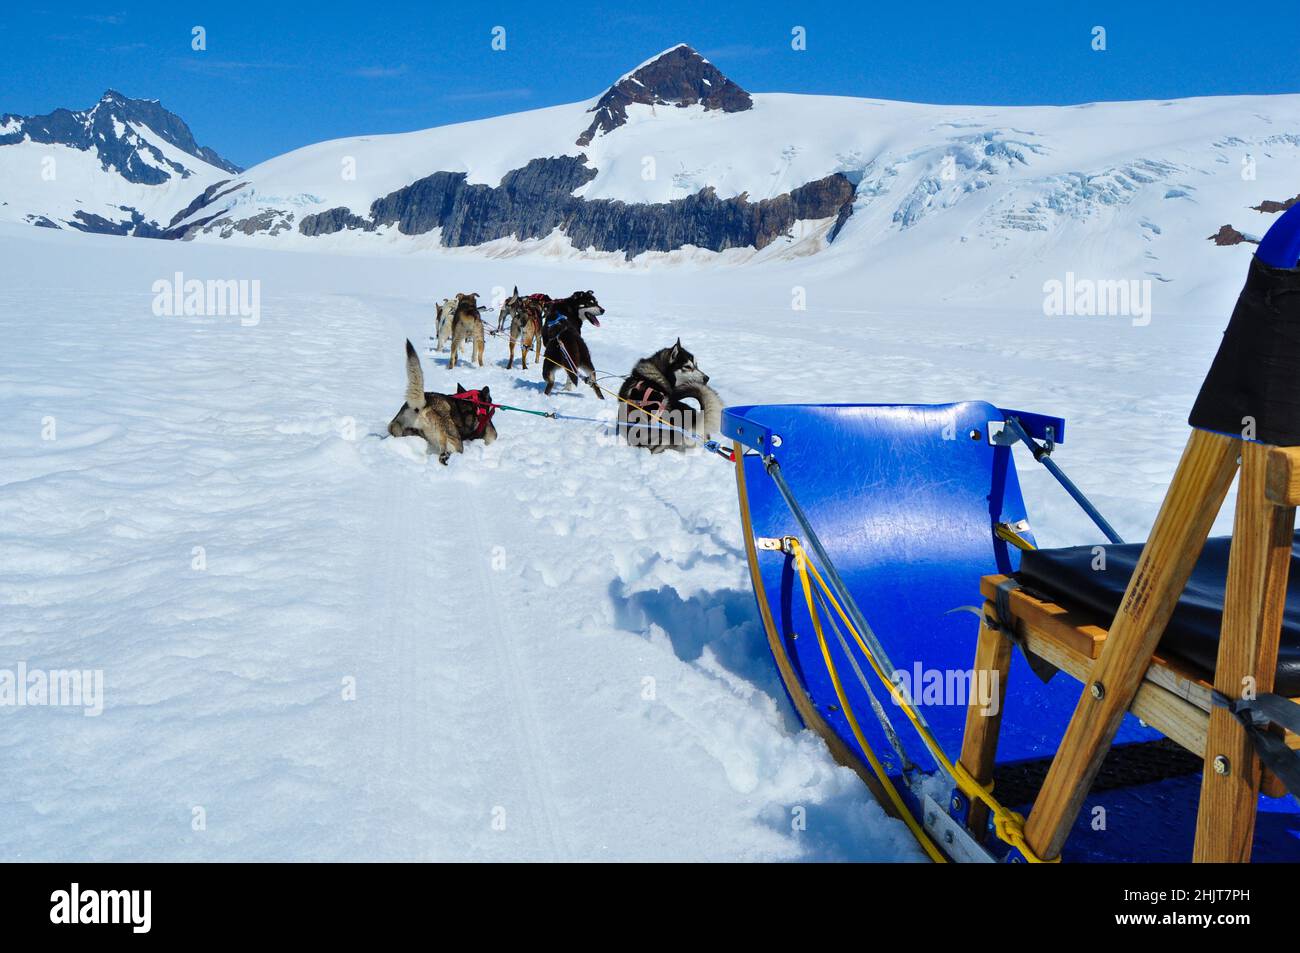 Musher camp on top of Mendenhall Glacier in Juneau Icefield, Alaska Stock Photo